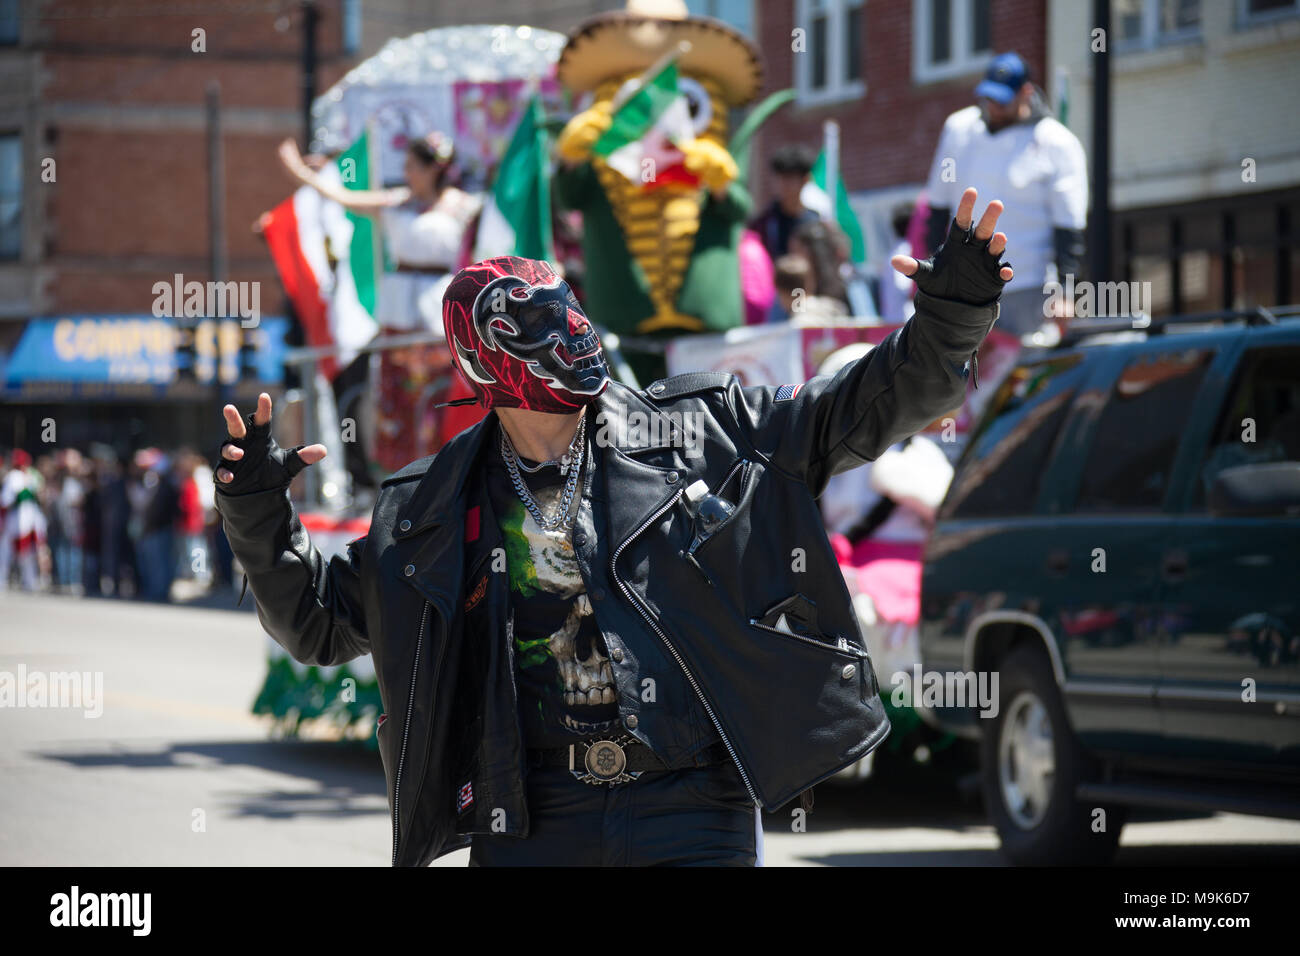 Chicago, Illinois, USA - May 07, 2017, The Cinco De Mayo Parade is held to remember the victory the Mexican forces had over the invading French army i Stock Photo